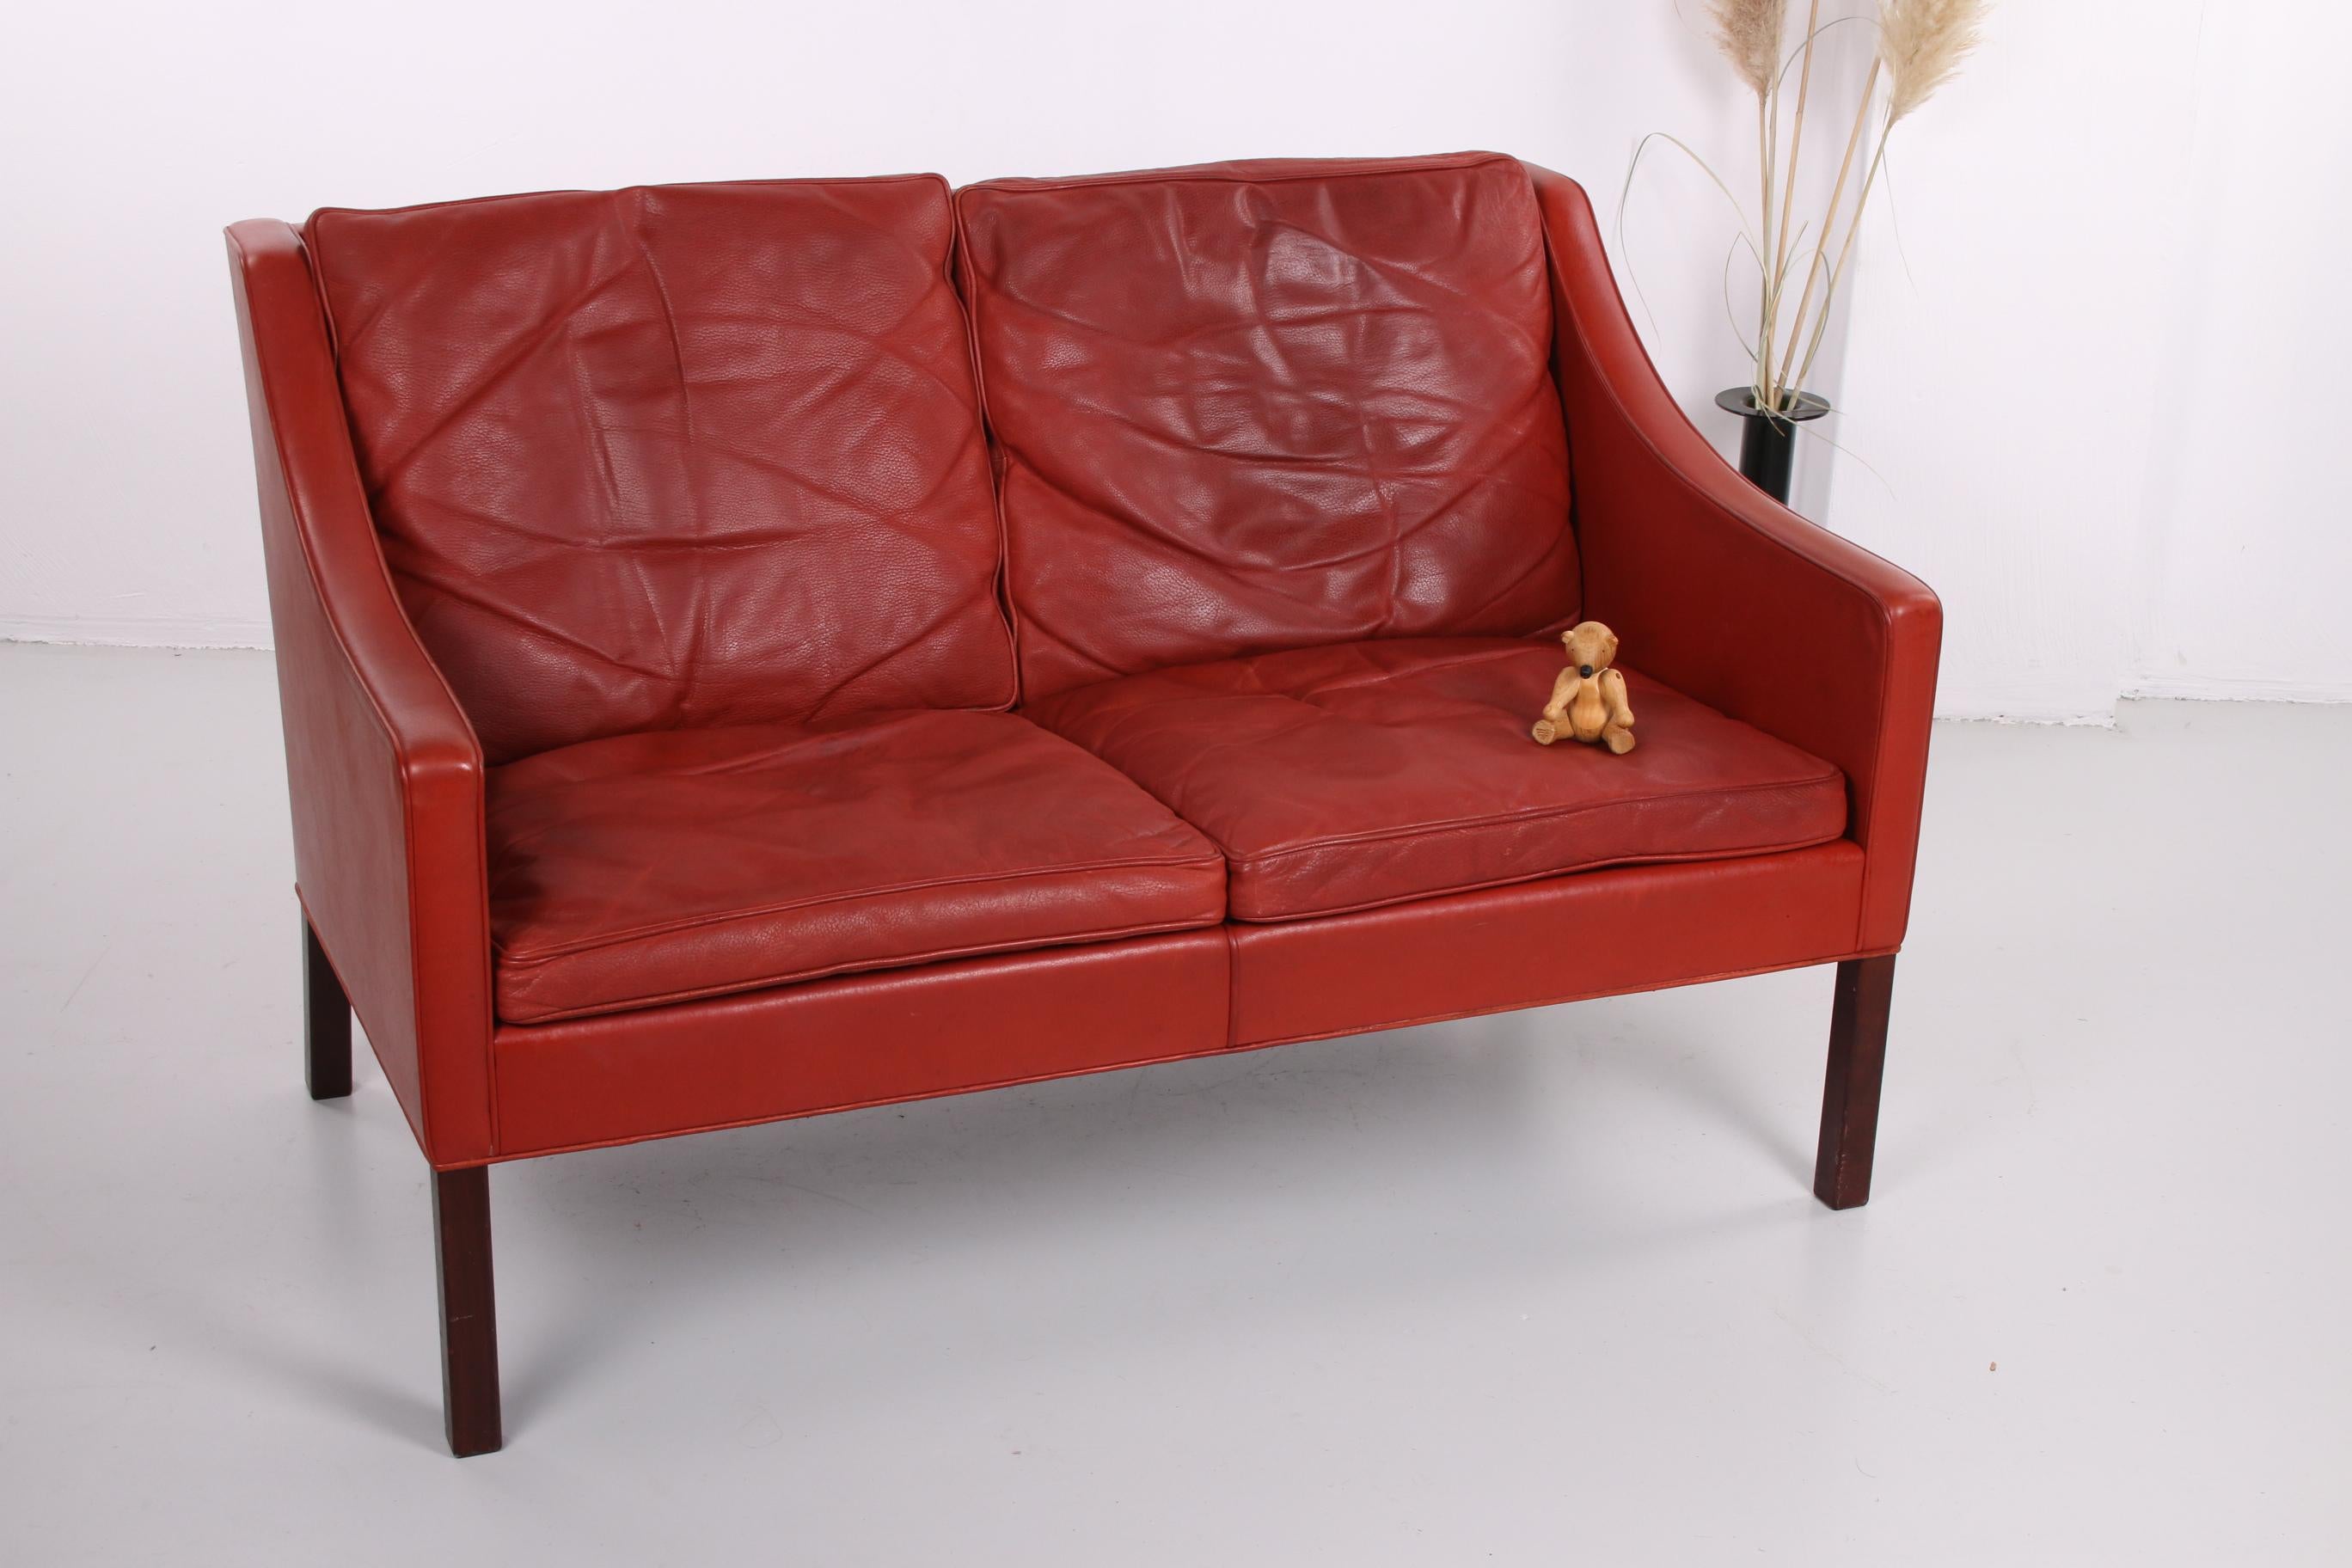 This beautiful coral red leather sofa has an elegant simplicity. The high-quality leather makes the sofa both comfortable and durable. A timeless design item and a great addition to the modern home. Børge Mogensen (Aalborg, April 13, 1914 - October